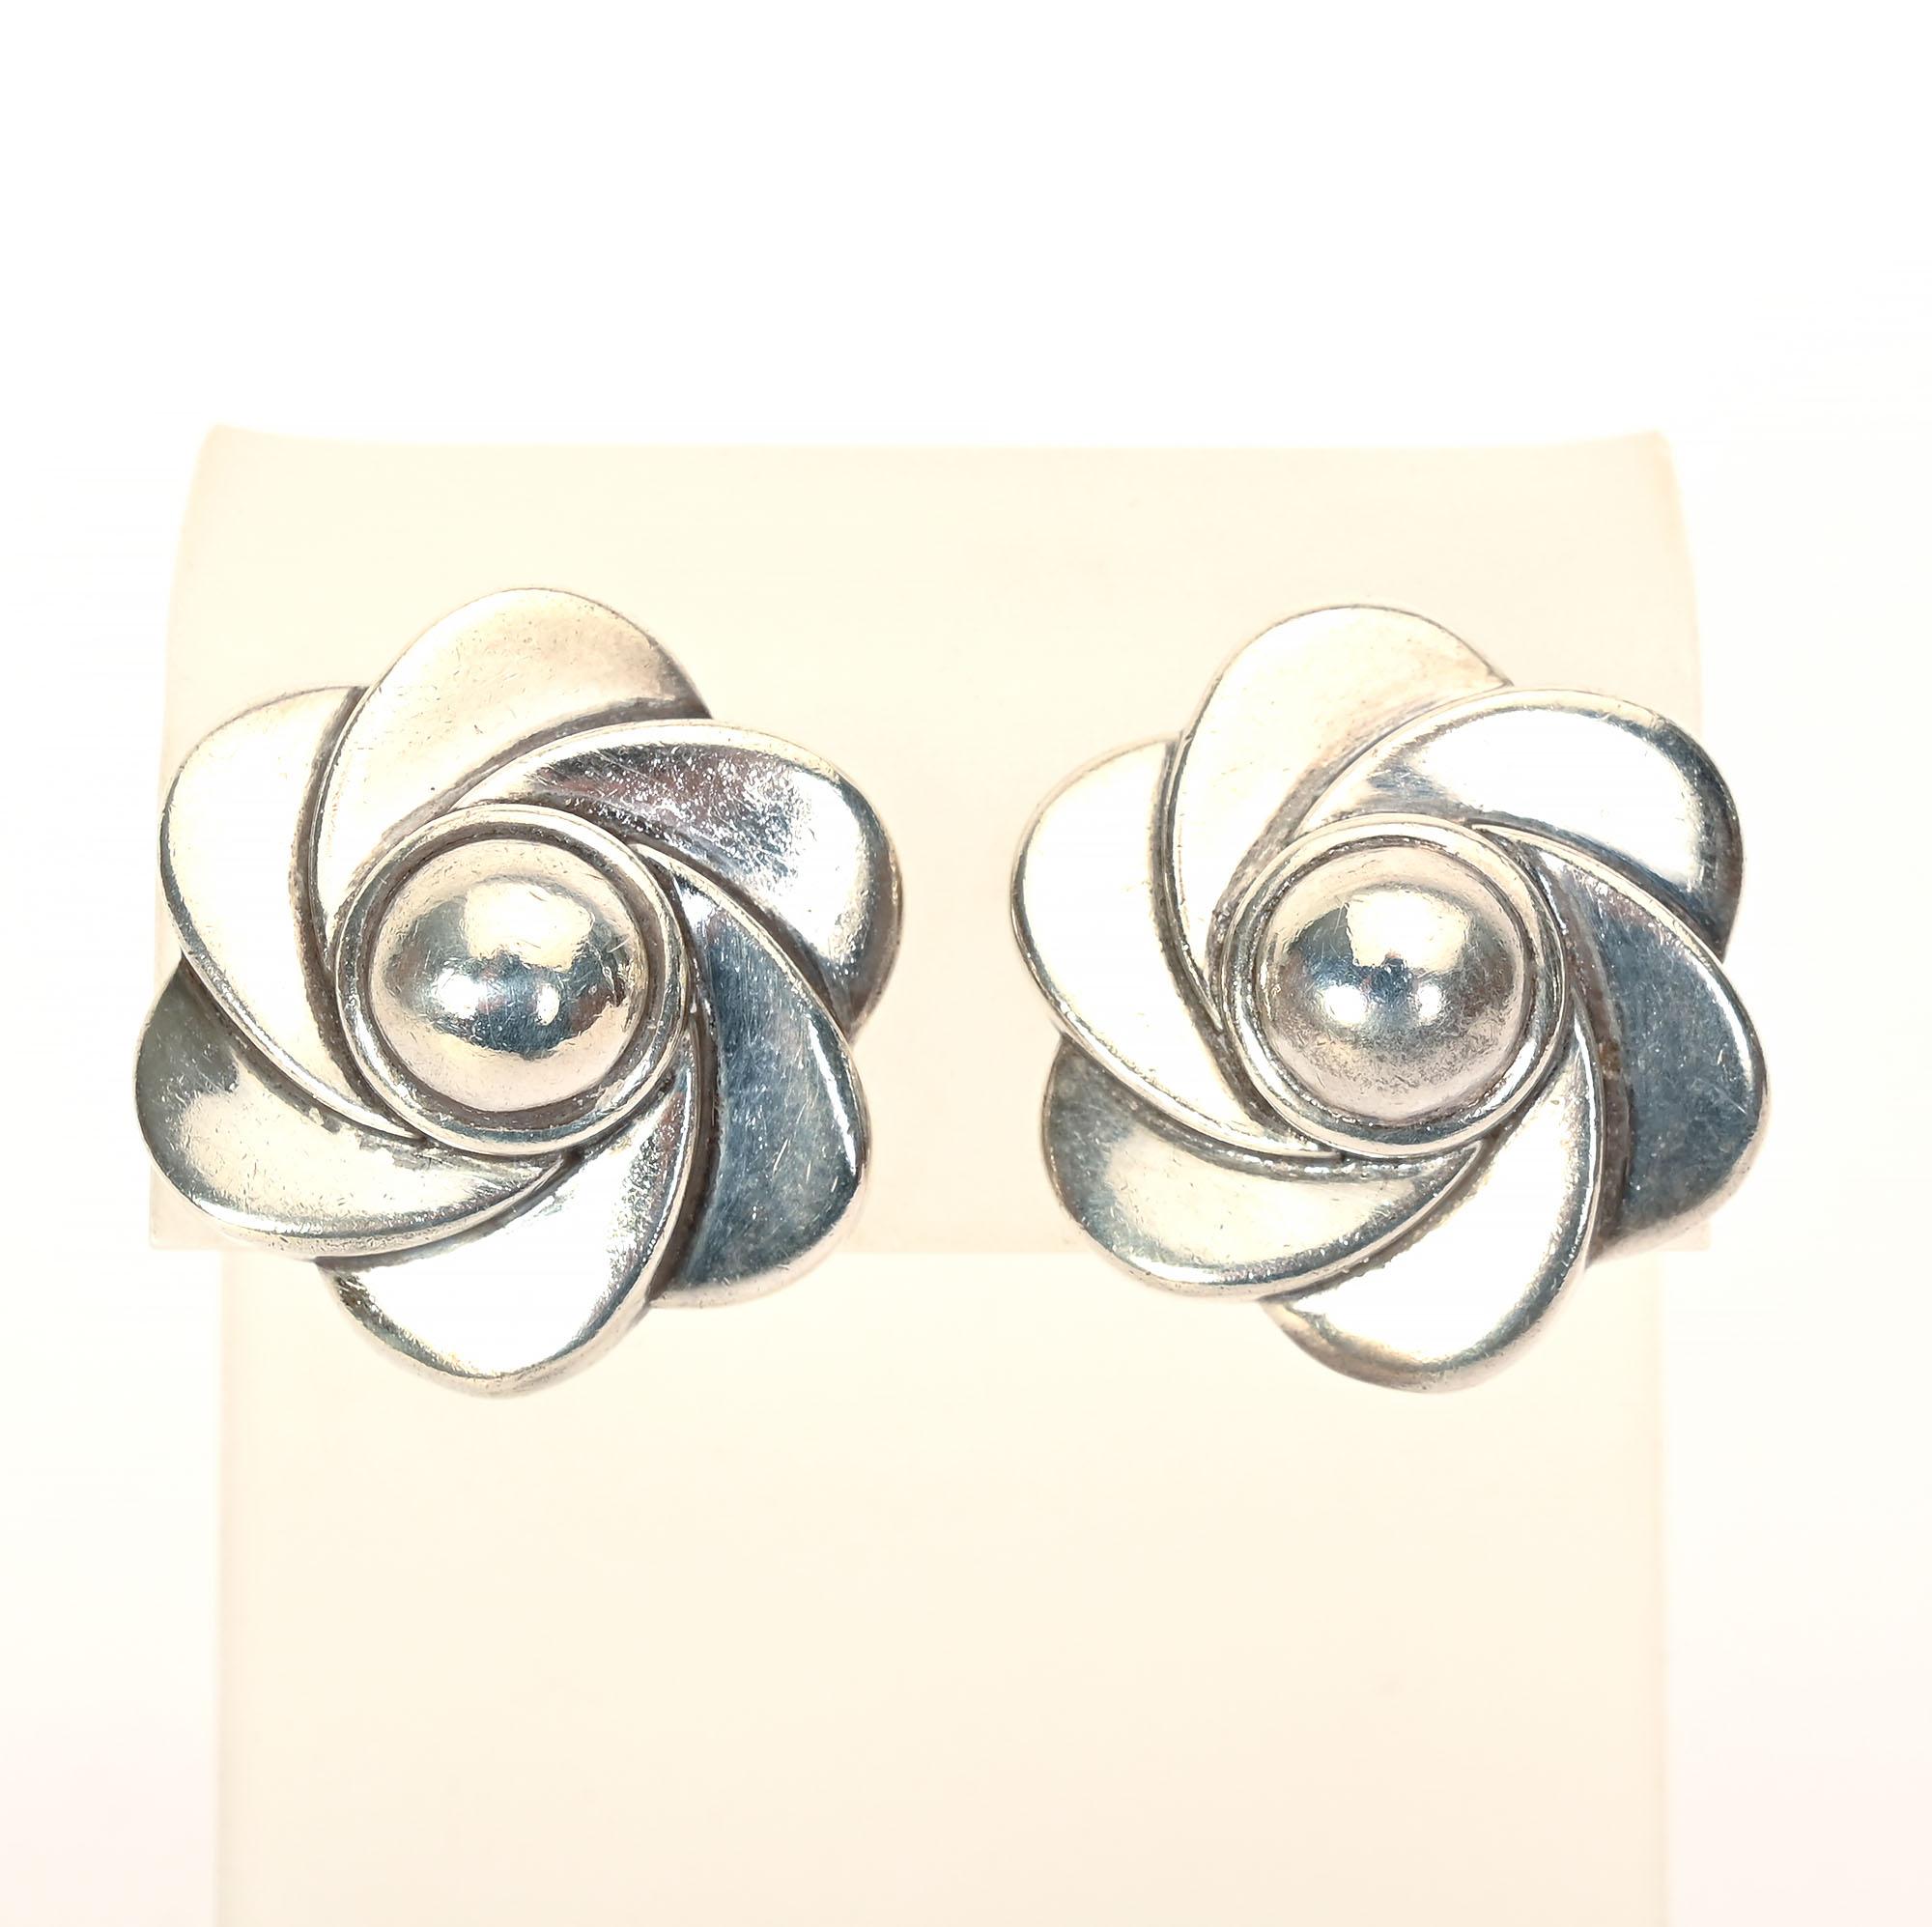 Sterling silver earrings in the form of stylized flowers by America's premier 20th century designer, Barry Kieselstein Cord. The earrings have domed centers and swirling petals. They measure 7/8